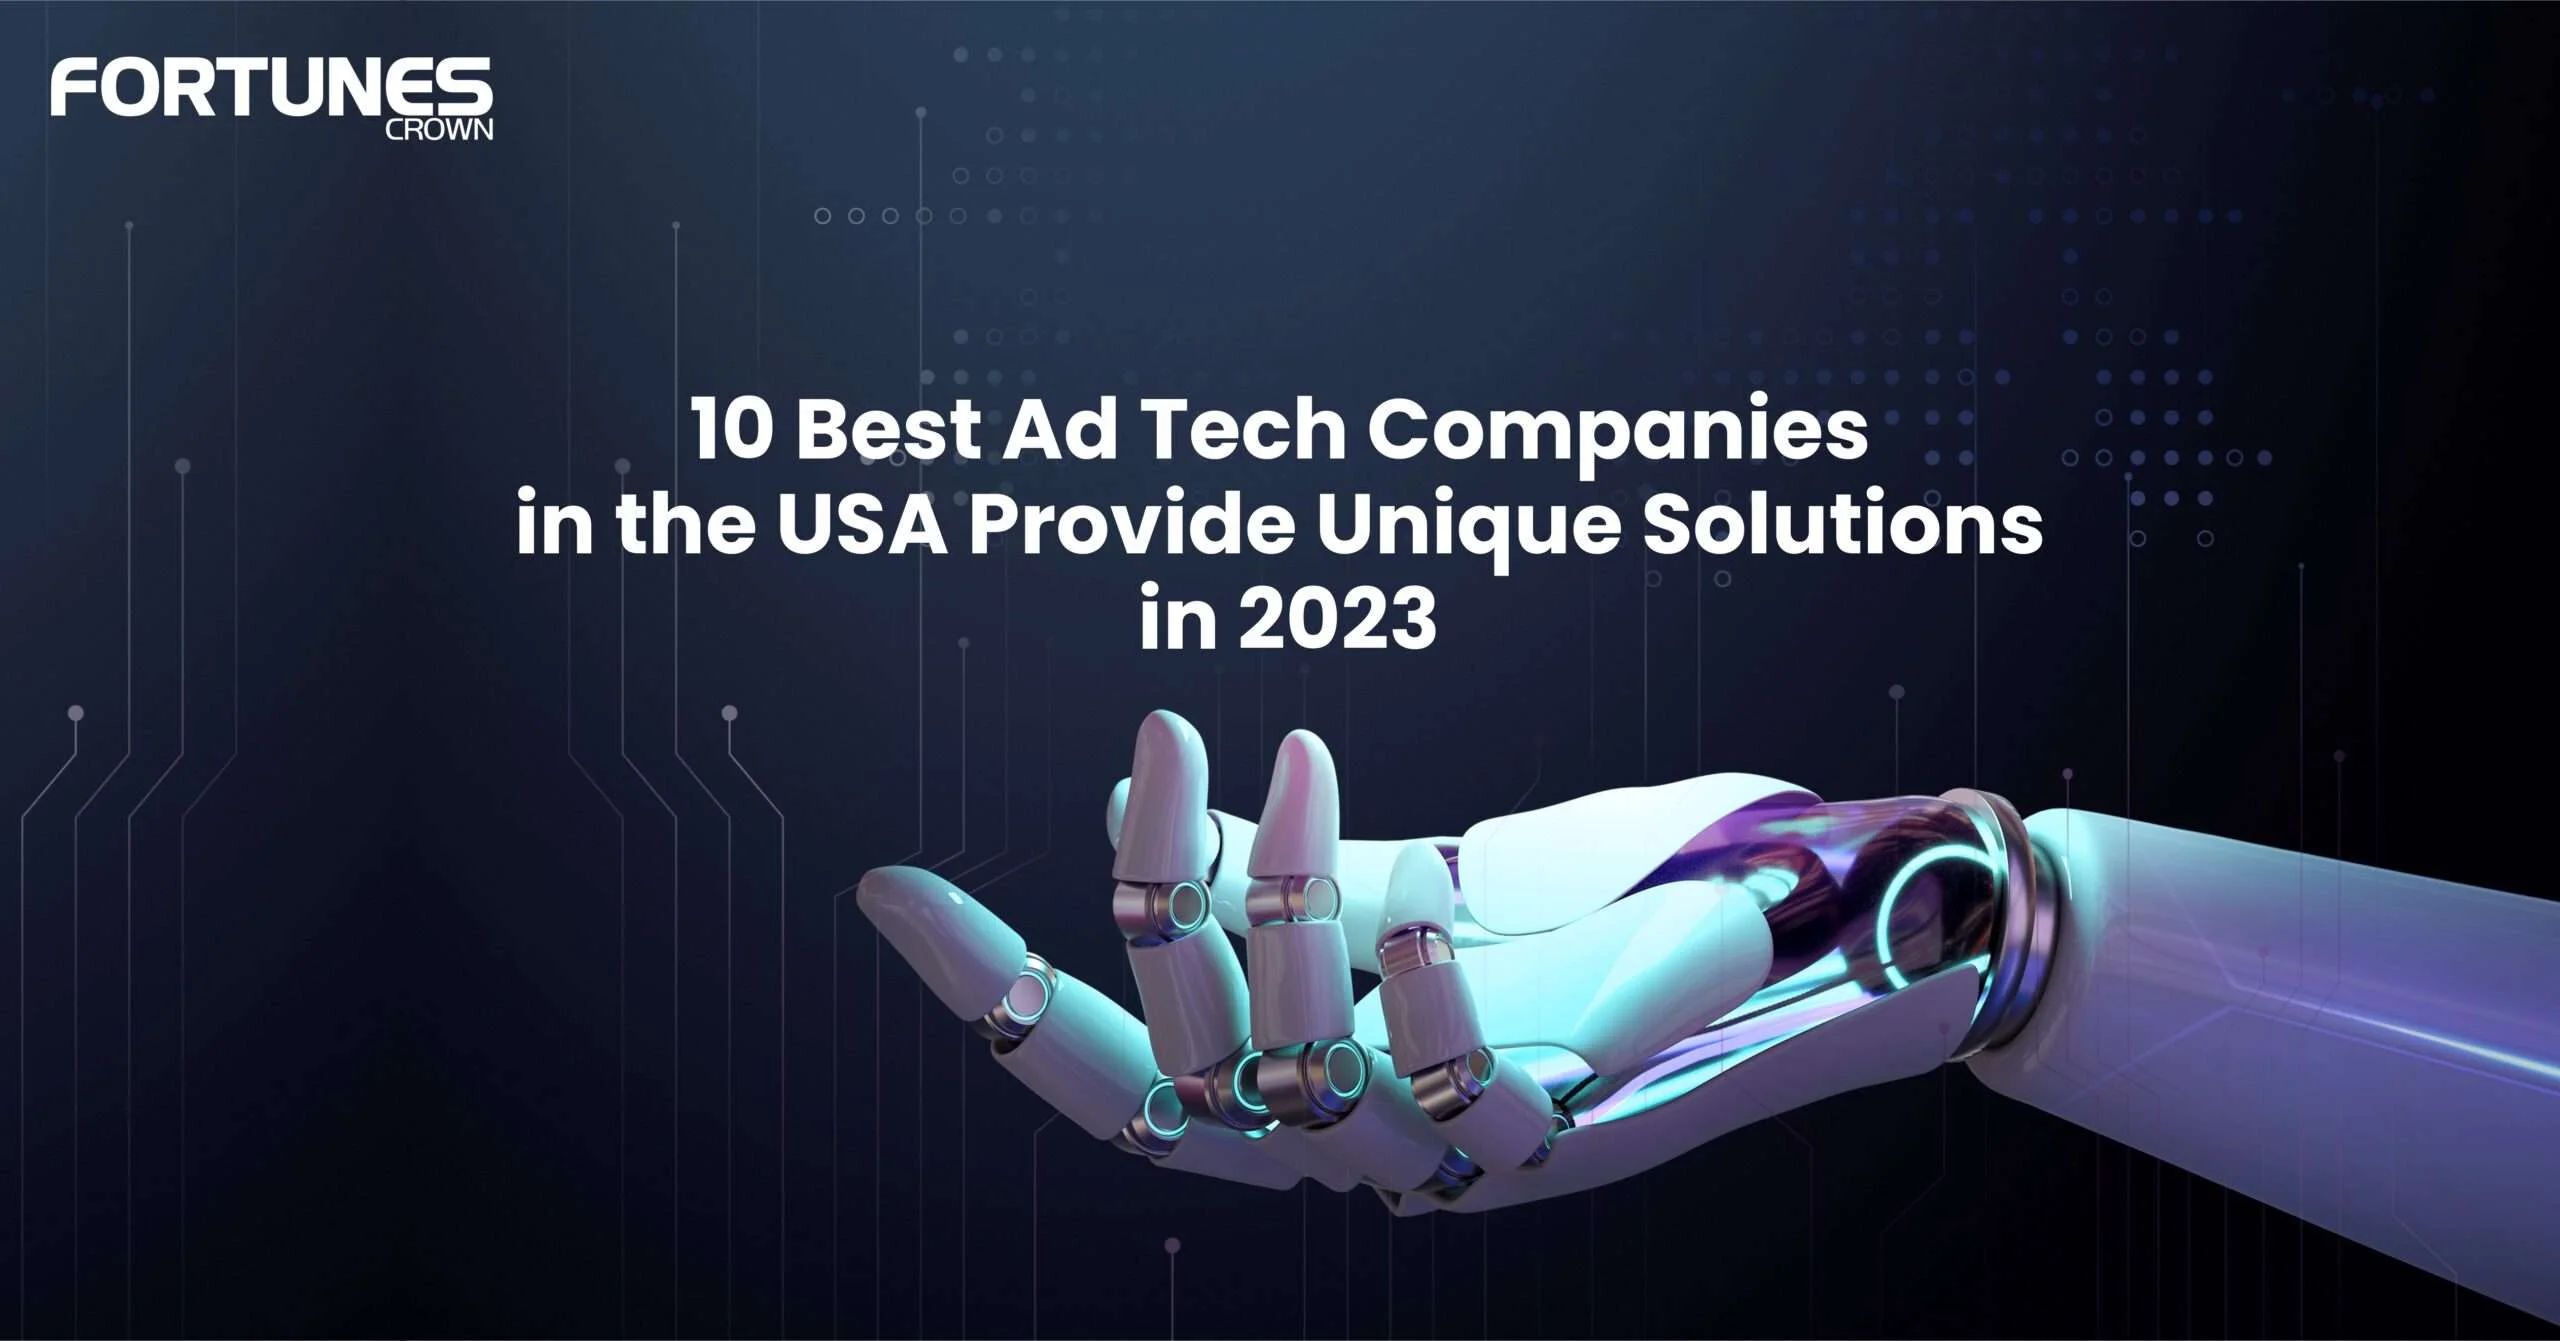 10 Best Ad Tech Companies in the USA Provide Unique Solutions in 2023